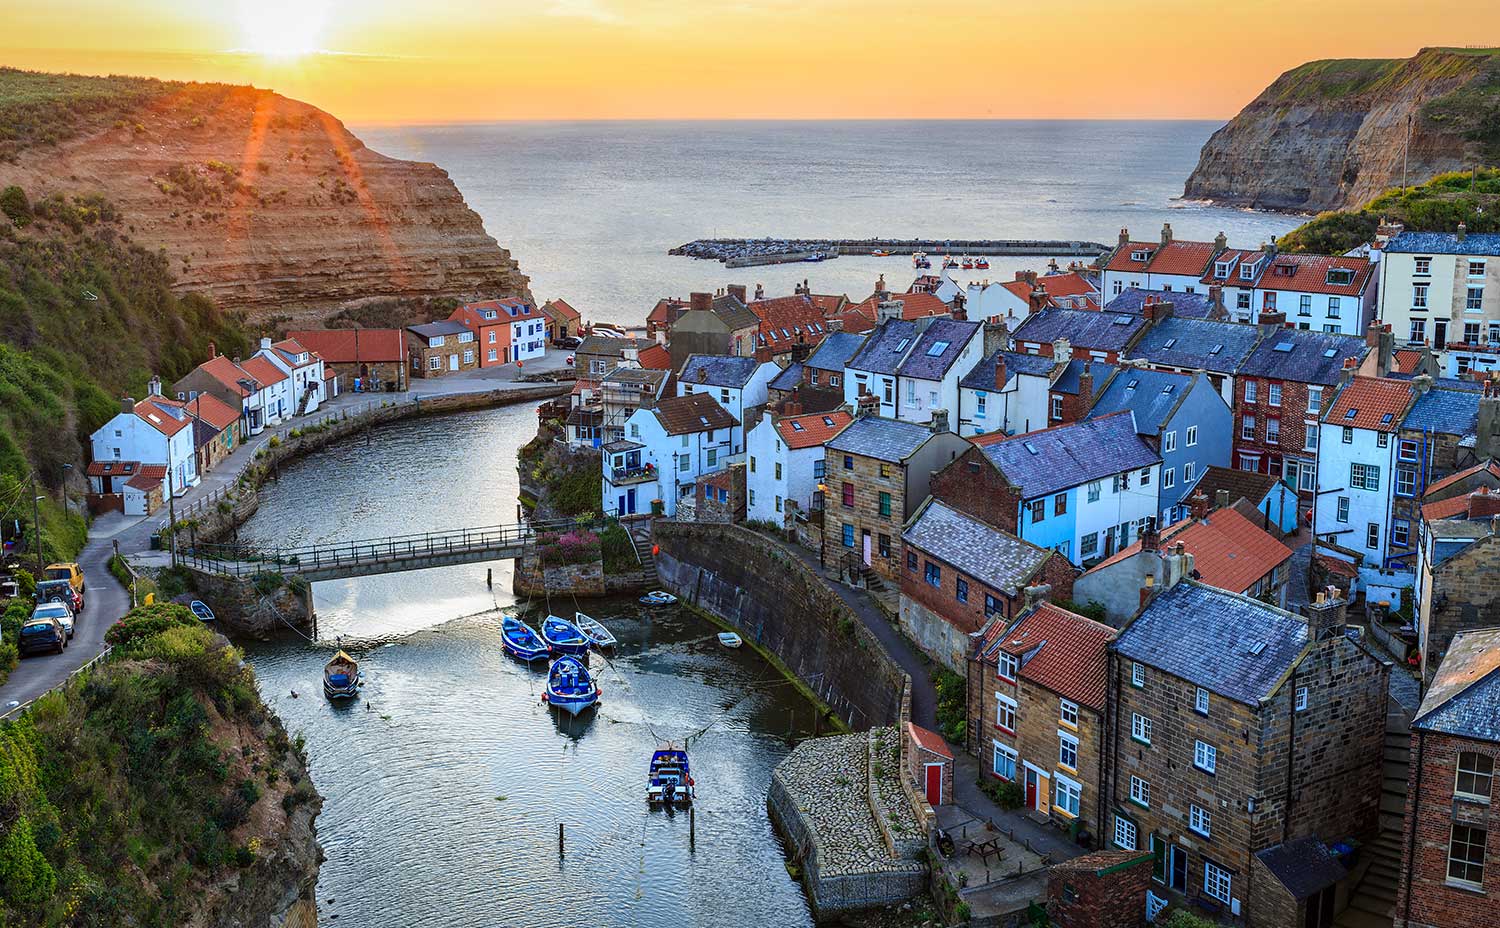 Staithes, A Stunning Little Seaside Town Close To Whitby